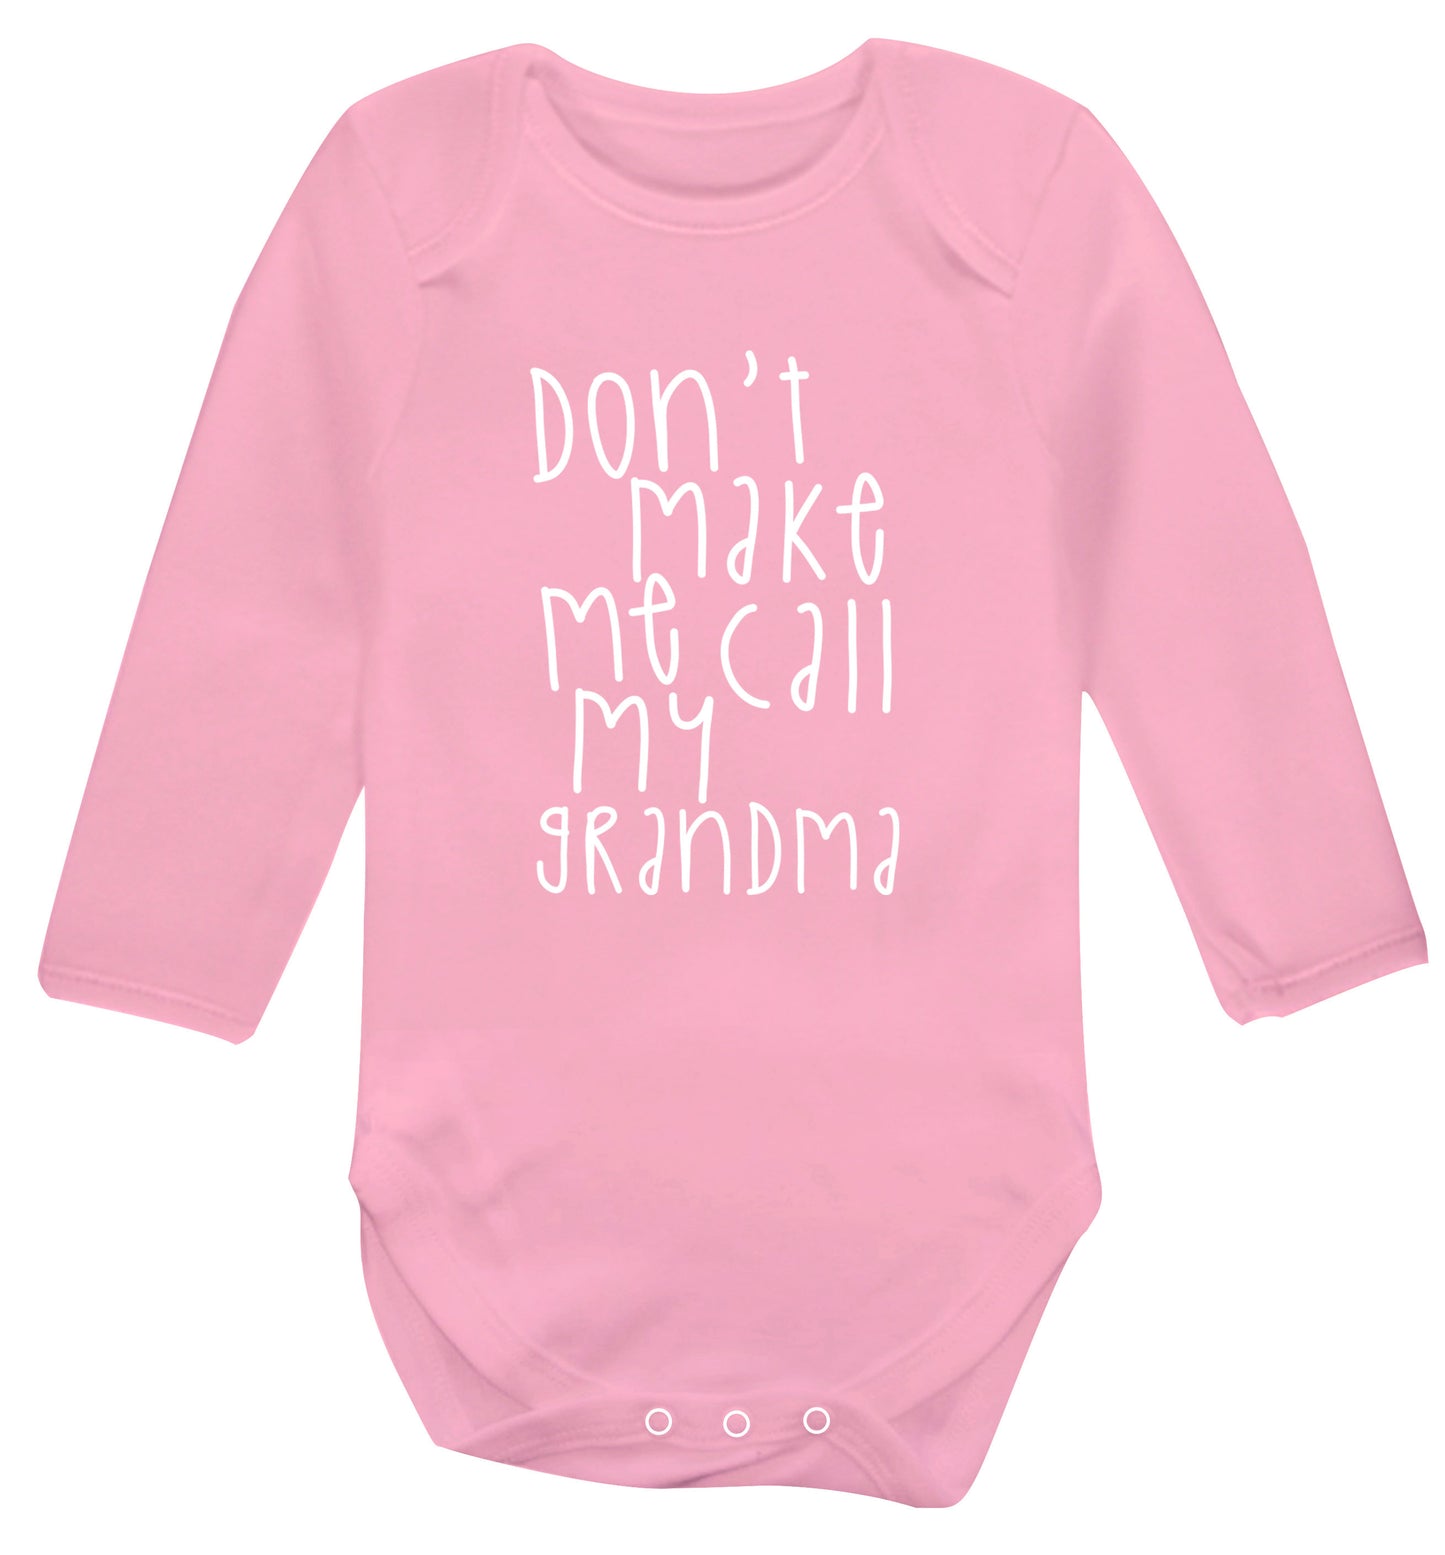 Don't make me call my grandma Baby Vest long sleeved pale pink 6-12 months